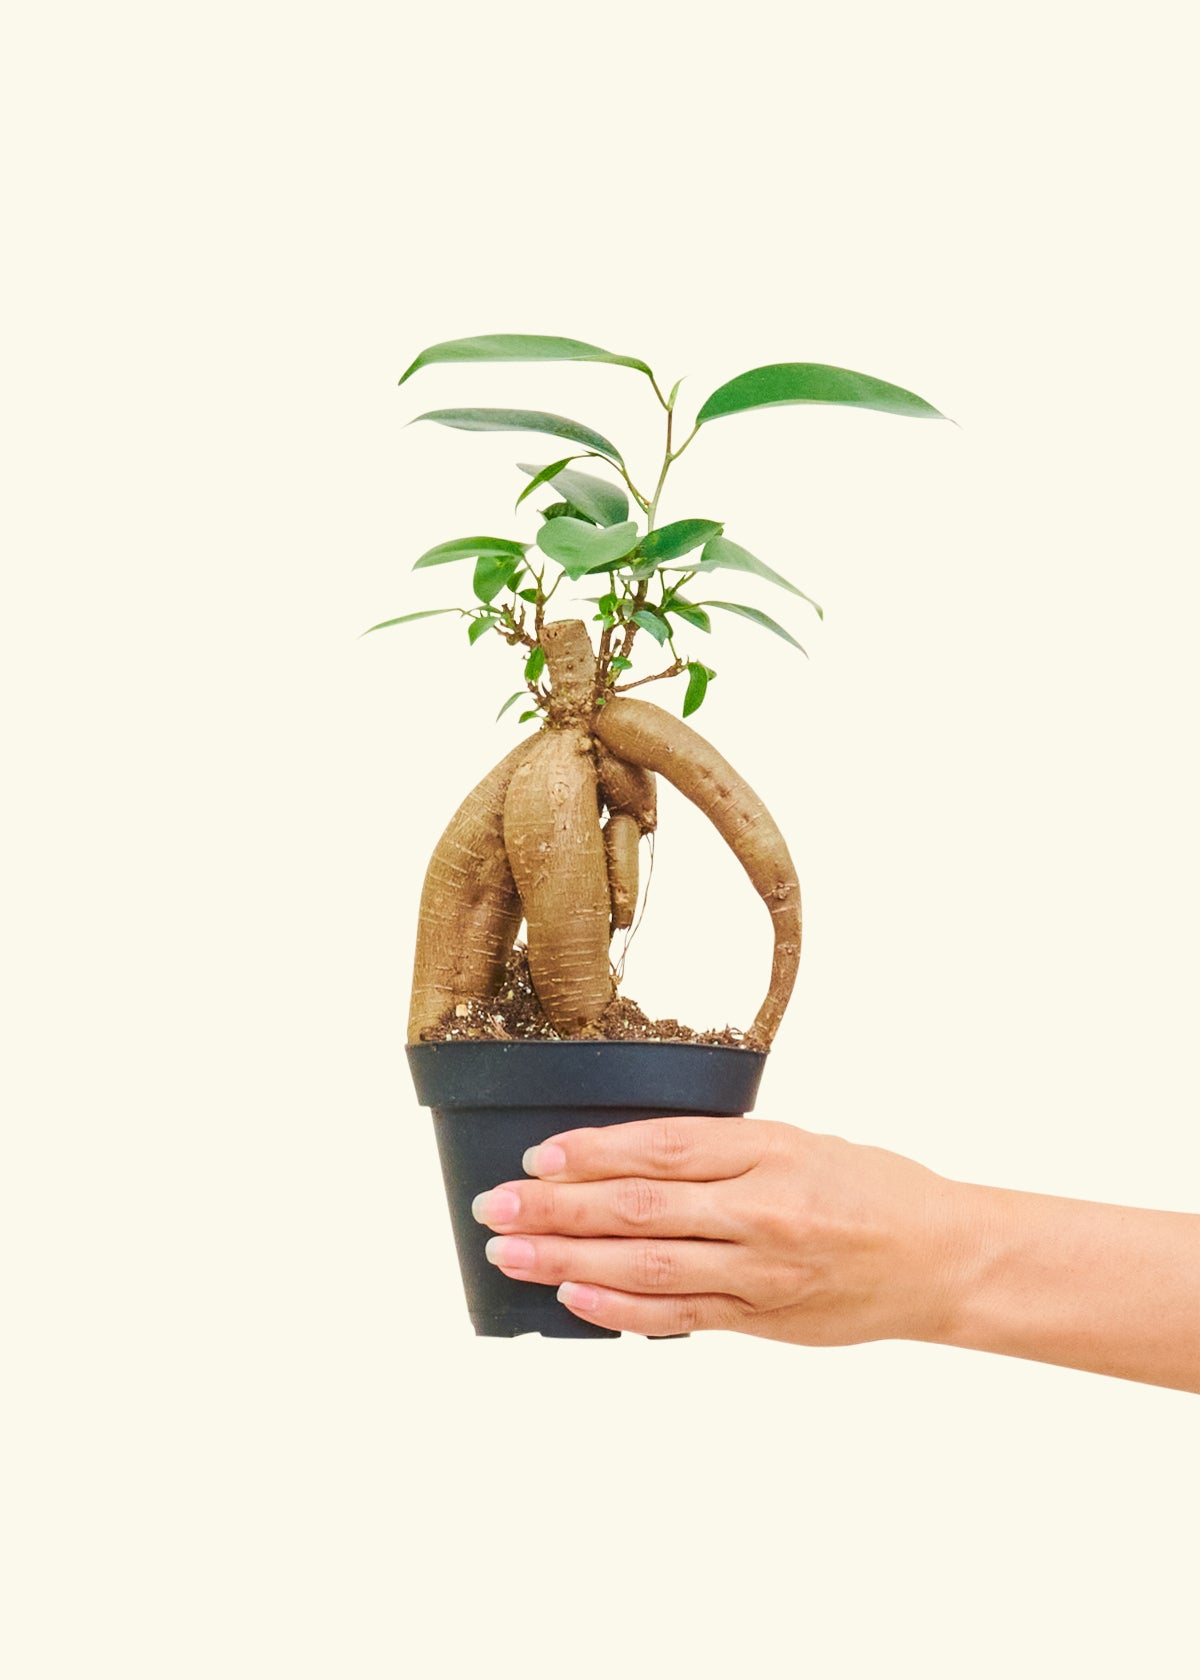 Ficus 'Ginseng', Small